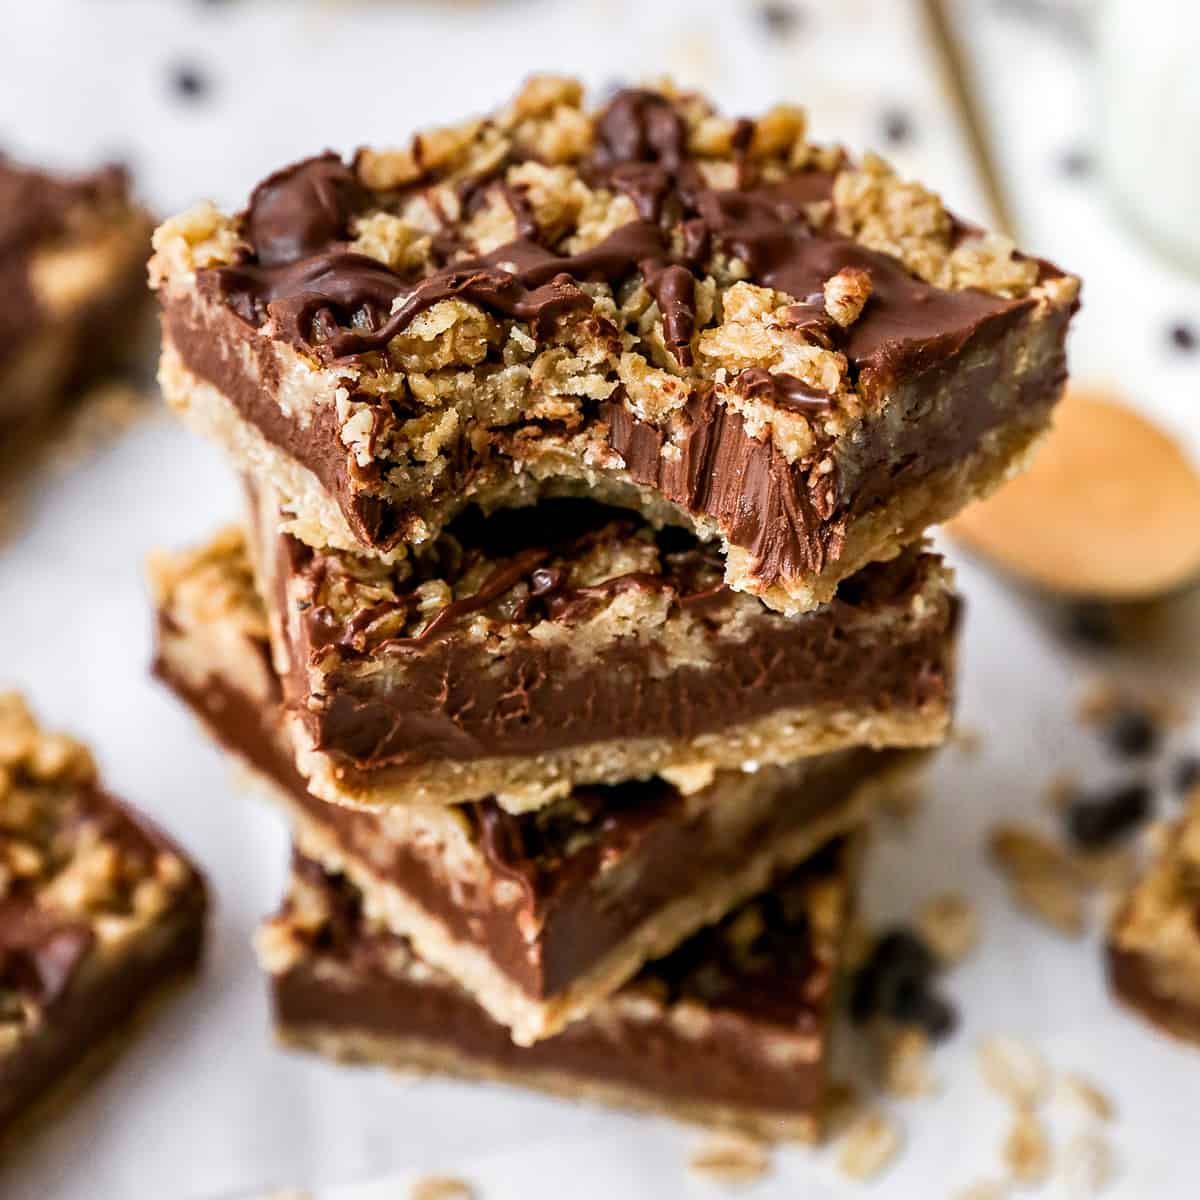 stack of 4 chocolate peanut butter oatmeal bars, the top one has a bite taken out of it